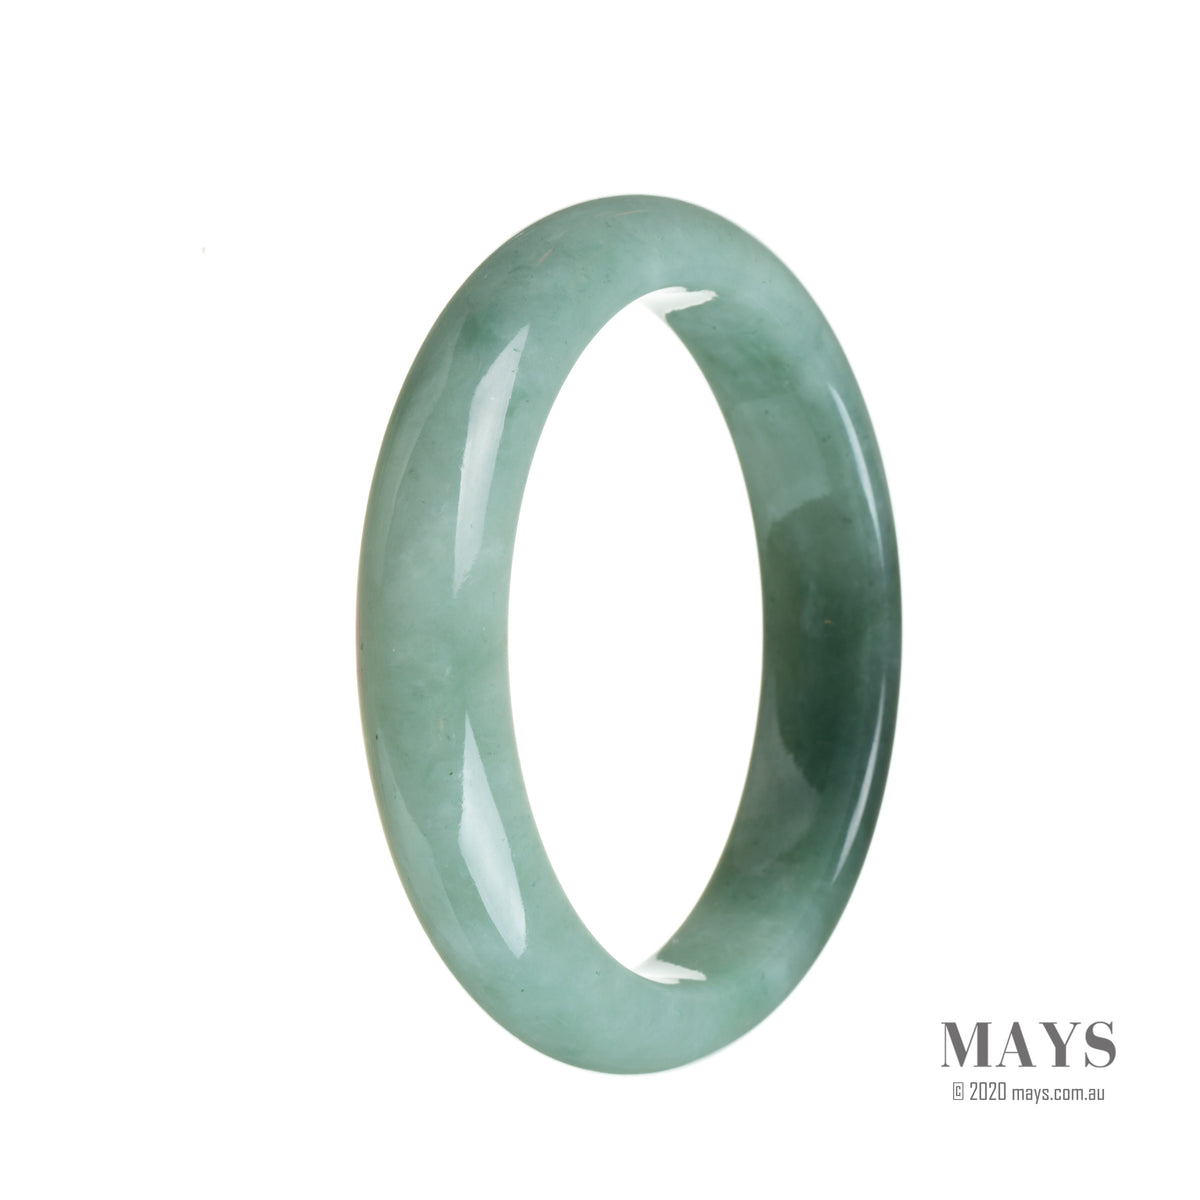 A half moon shaped jadeite jade bracelet in shades of green, featuring a genuine natural stone with a dark green section.